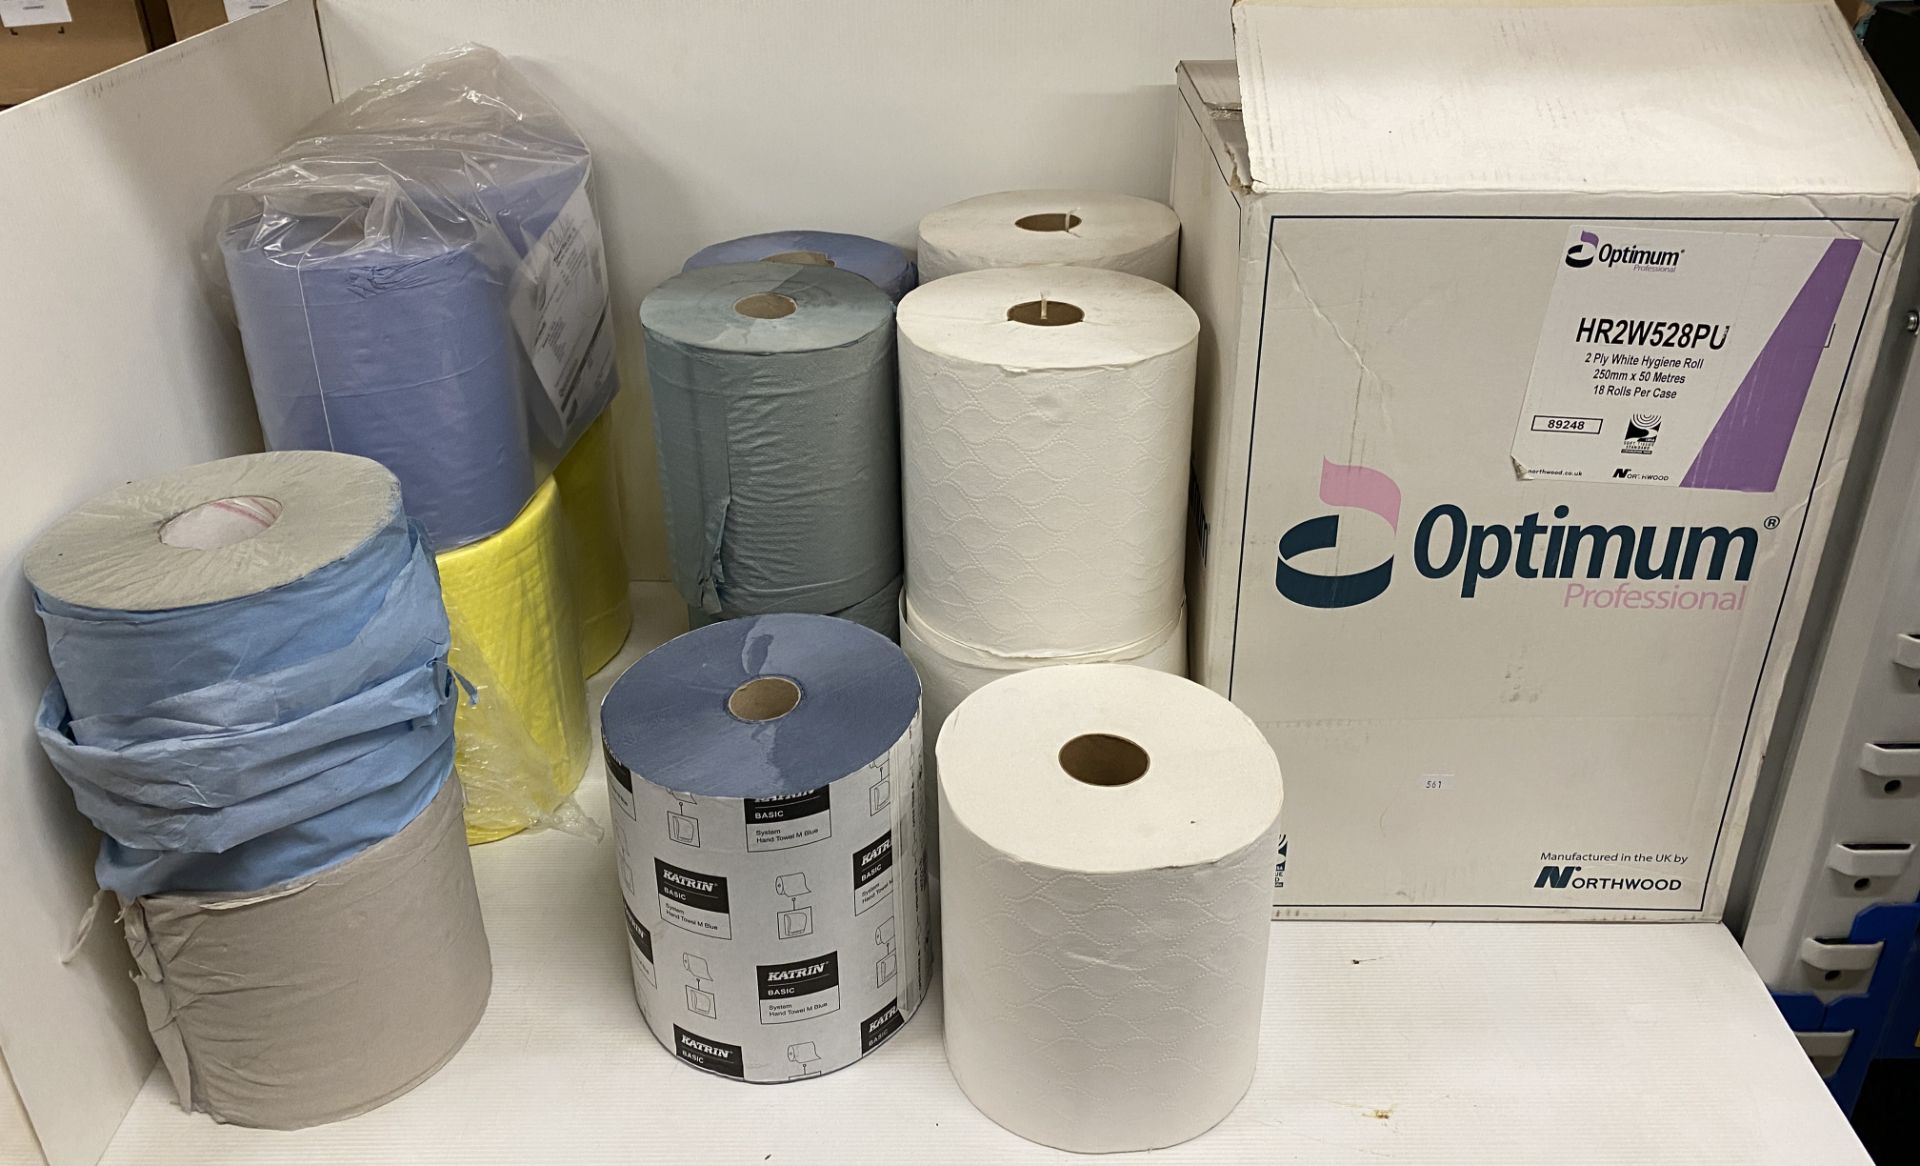 Contents to part rack - 18 rolls of Optimum 2-ply white hygiene paper rolls and 12 assorted hand